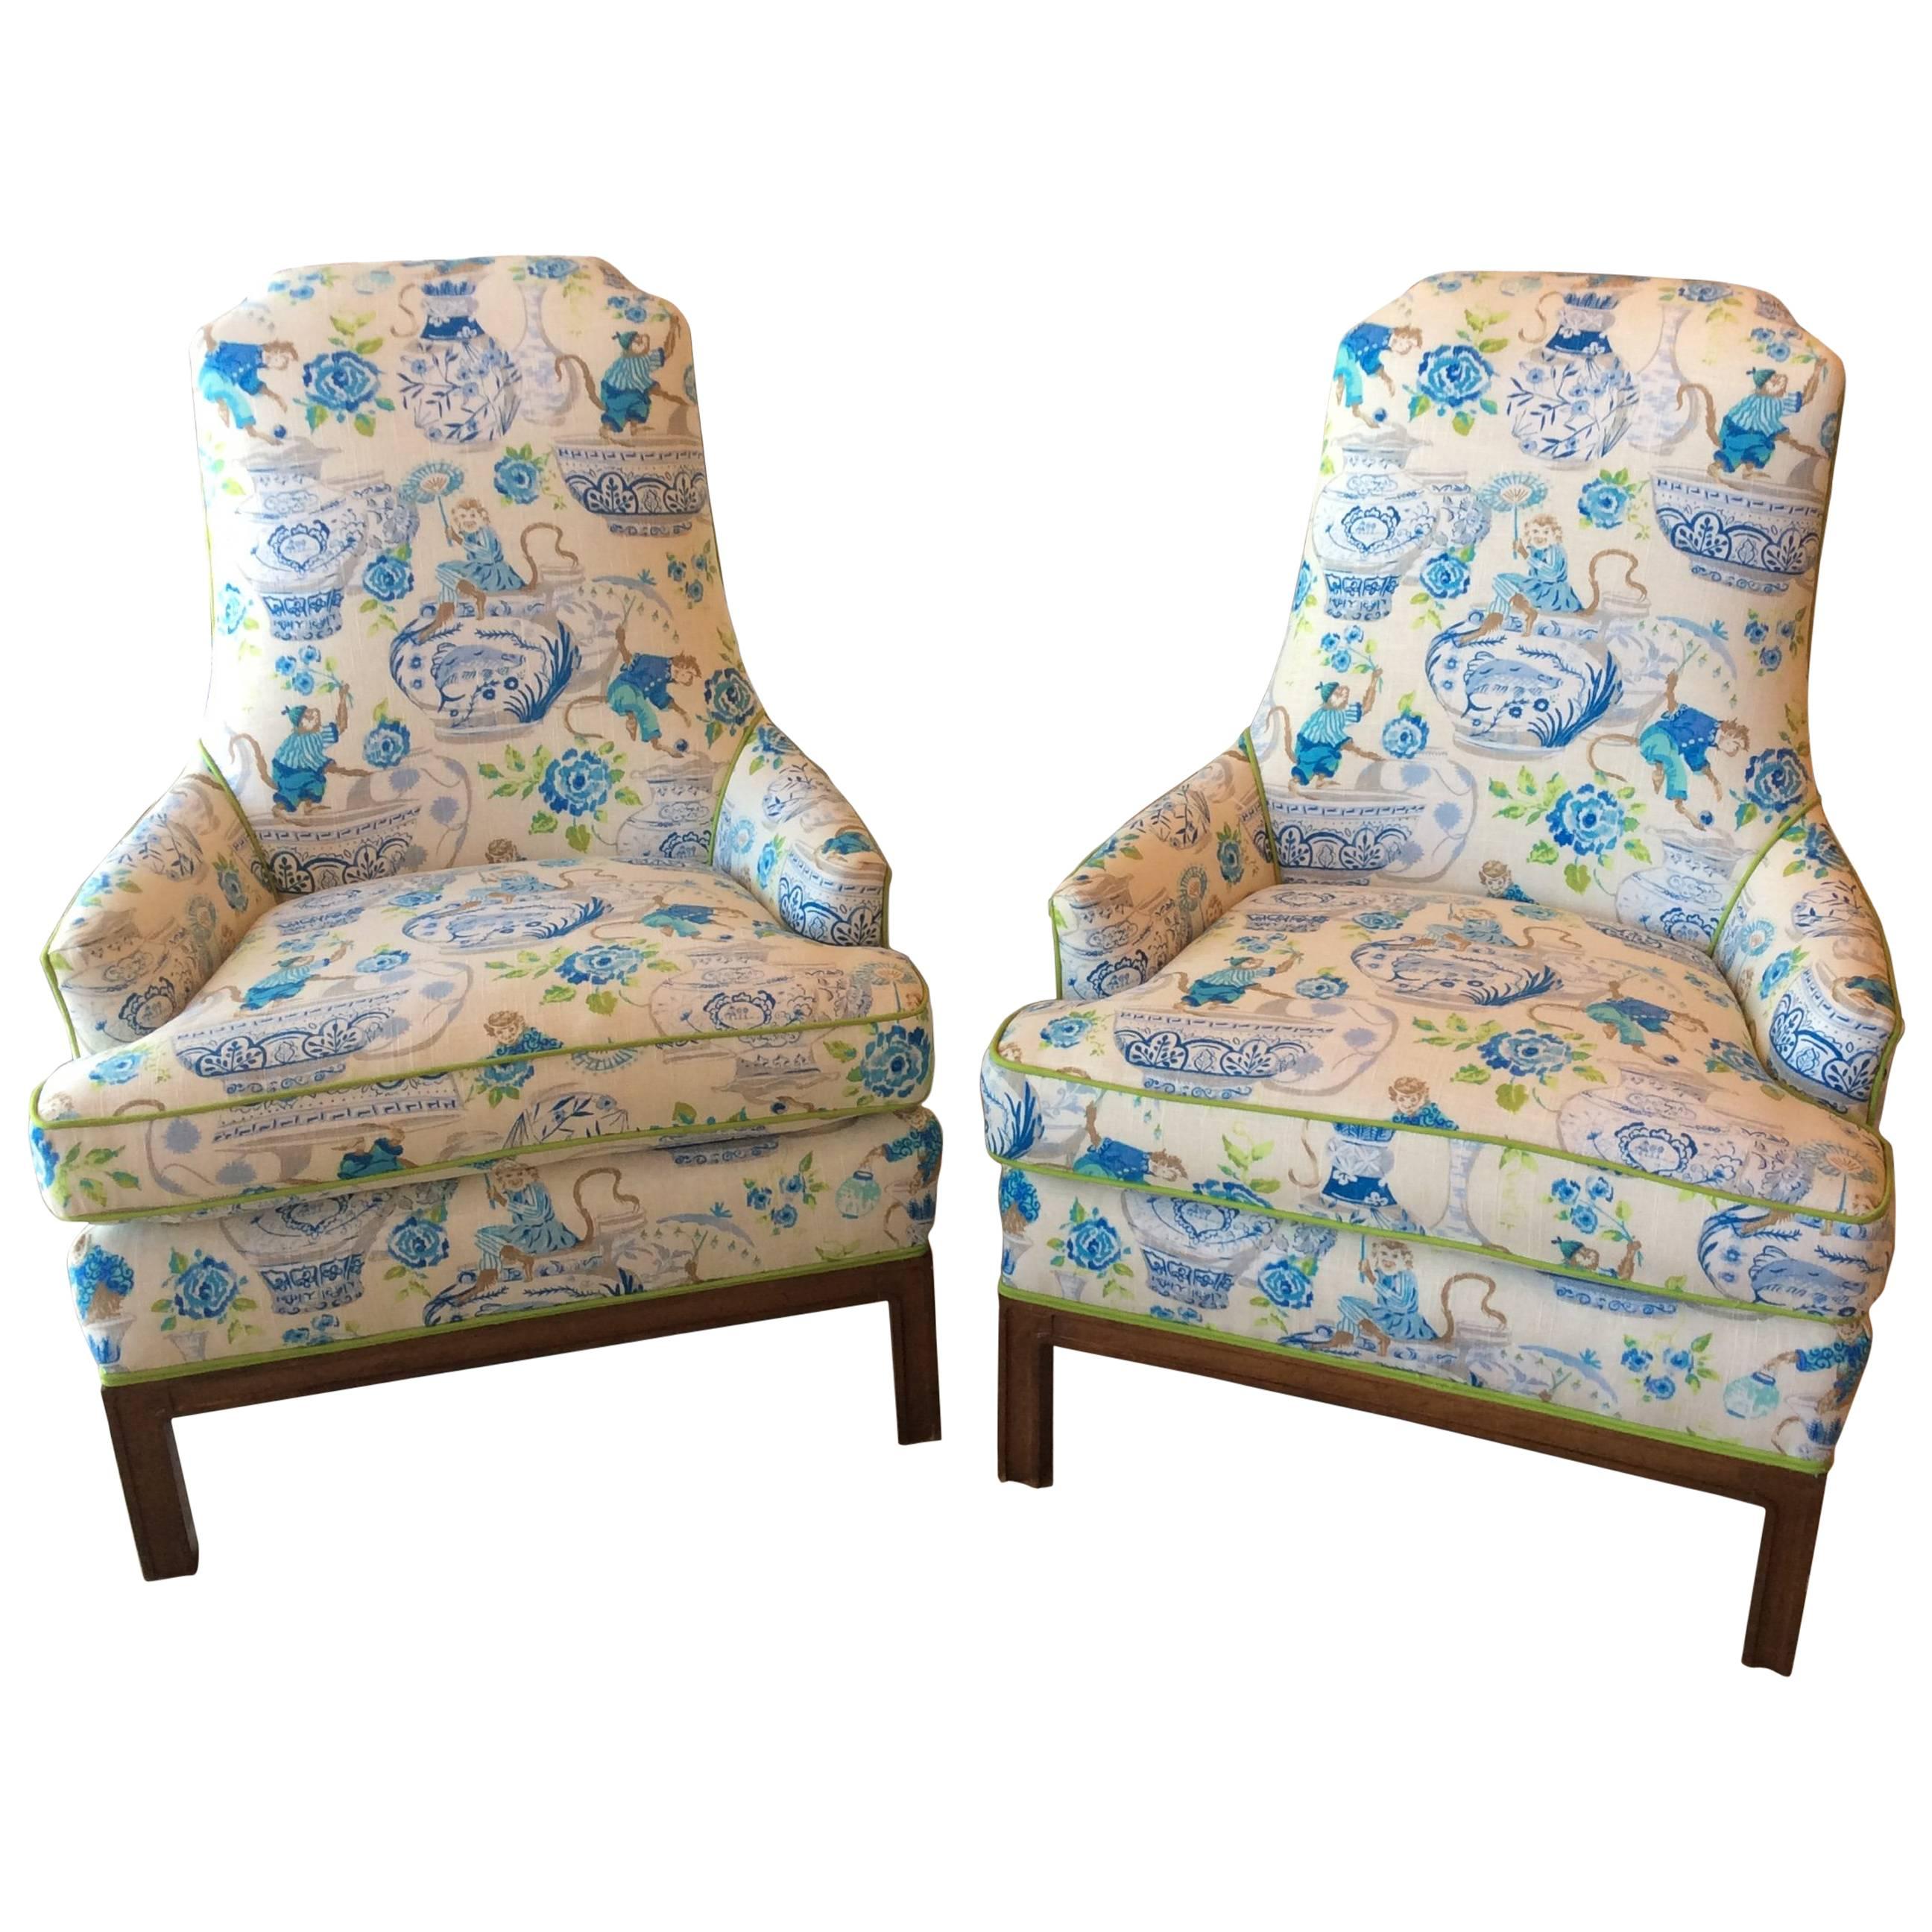 Pair of Mid-Century Modern Monkey Arm chairs Lounge Club Upholstered Chinoiserie